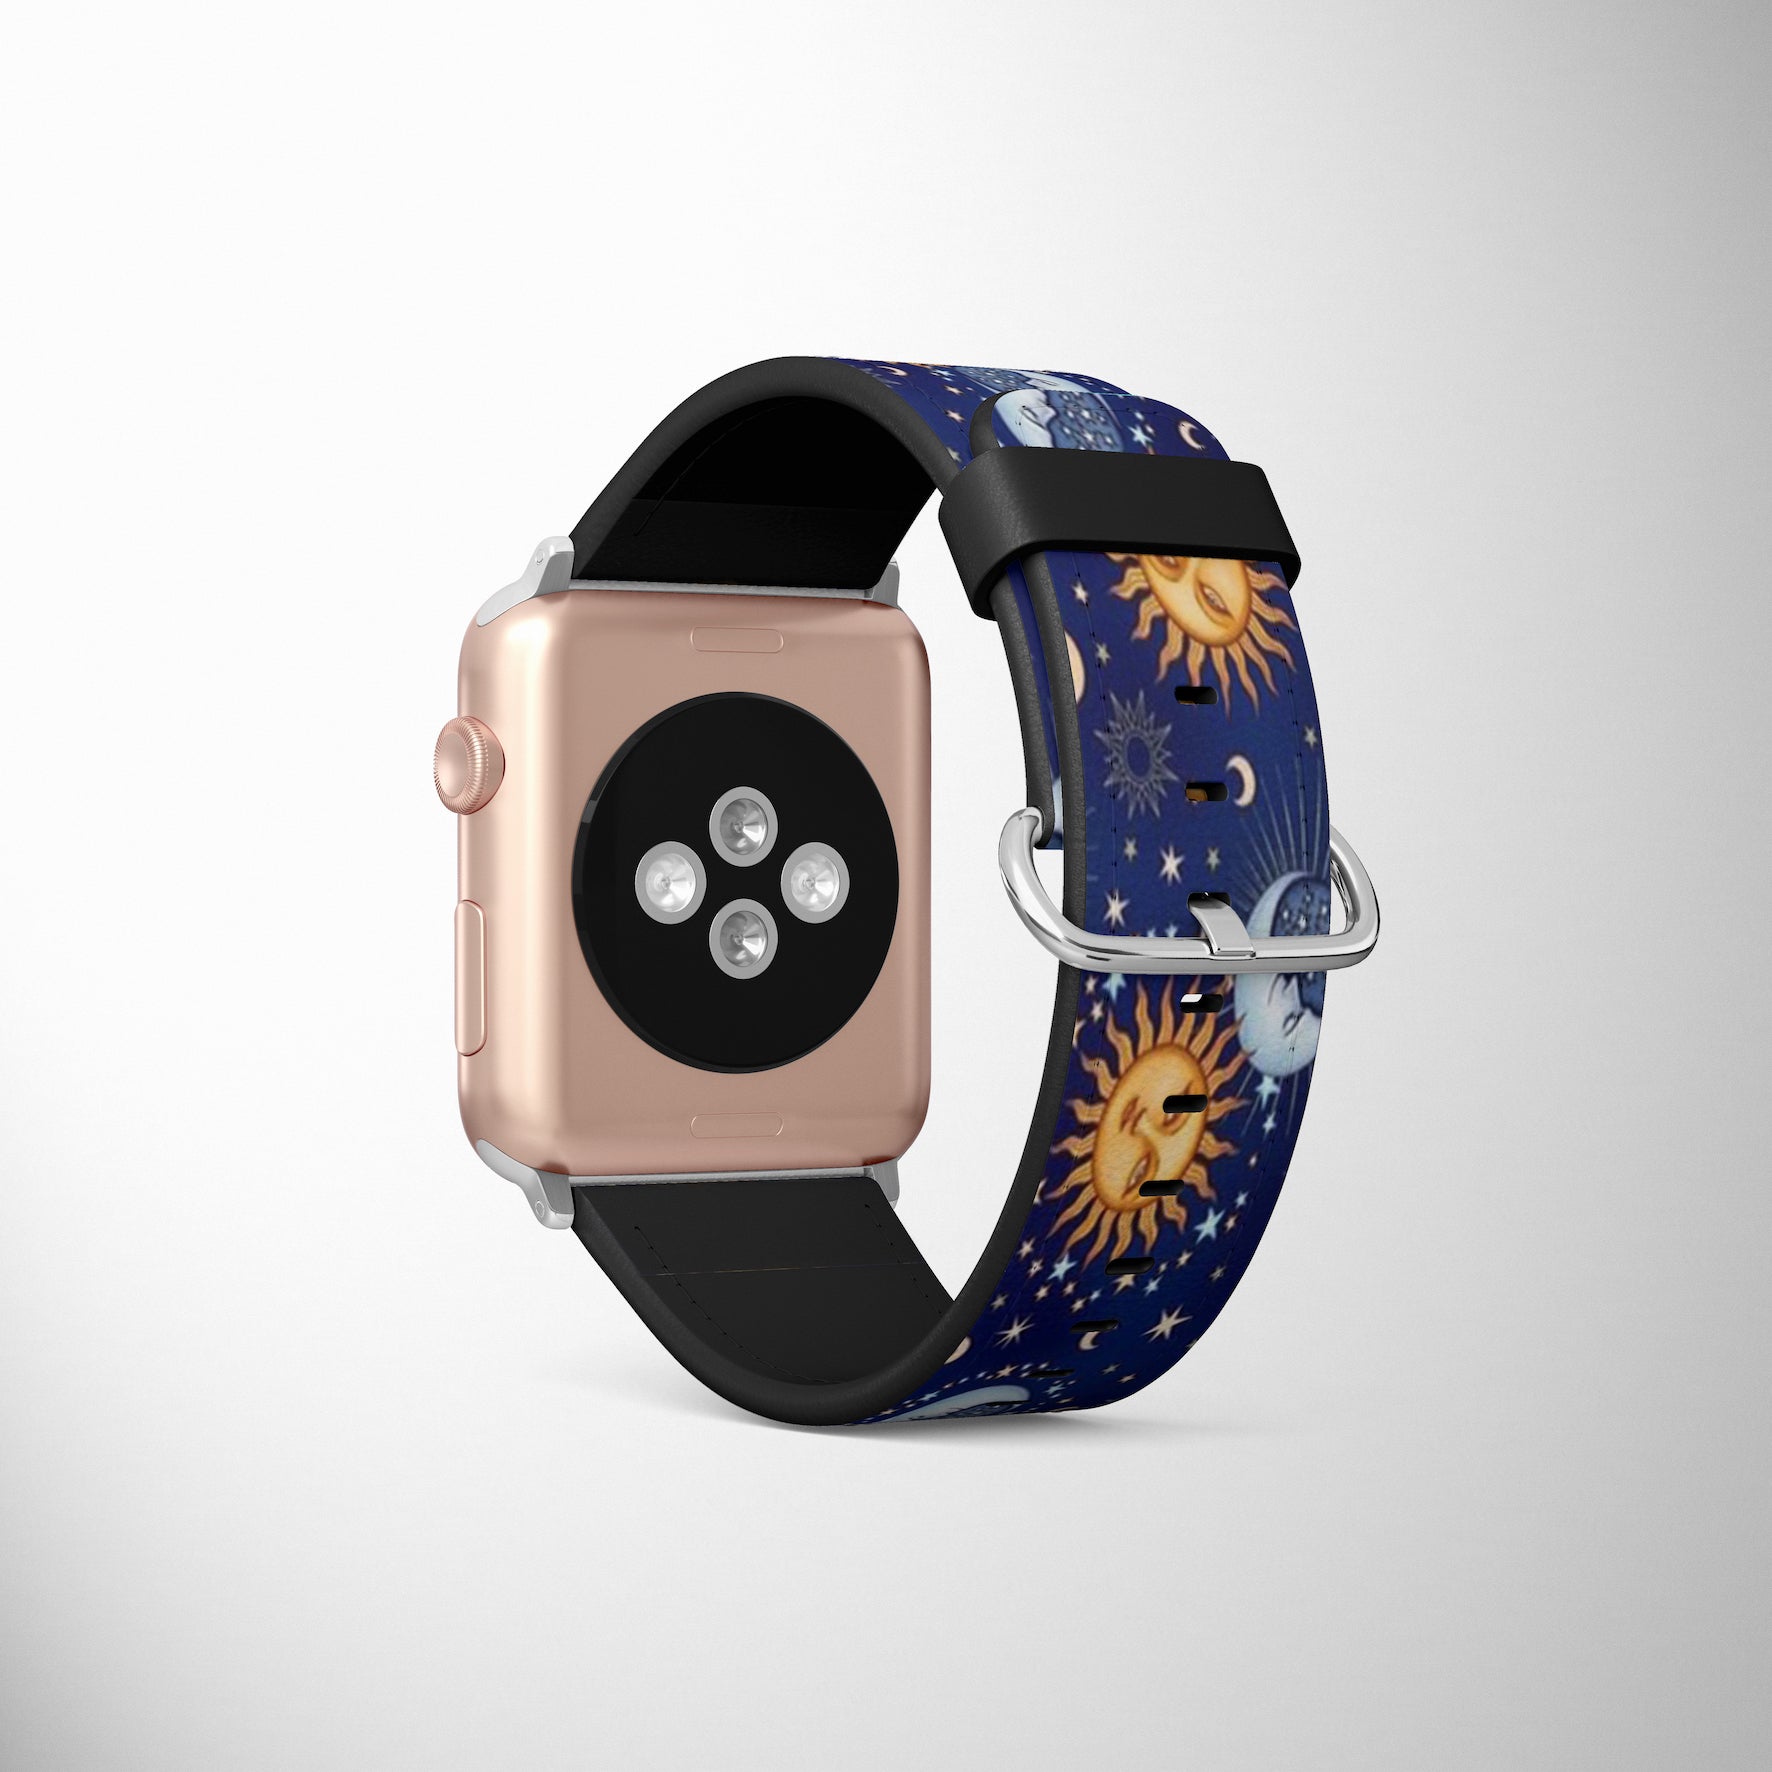 Moons & Stars Faux Leather Apple Watch Band for Apple Watch 1,2,3,4,5,6,SE - www.scottsy.com